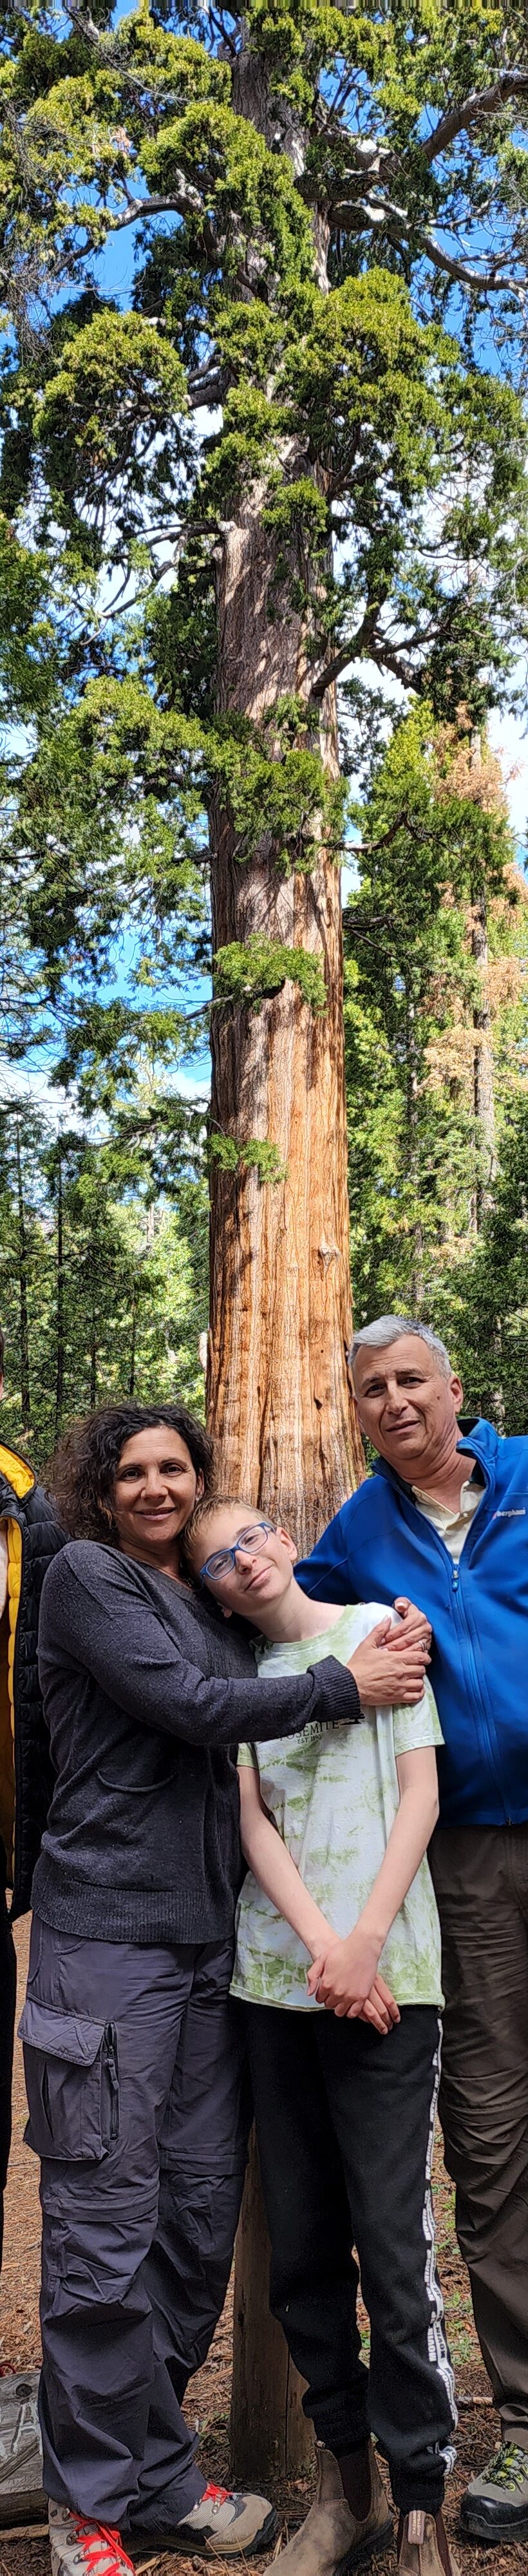 Group of visitors on a giant sequoia hike during a tour at Yosemite National Park